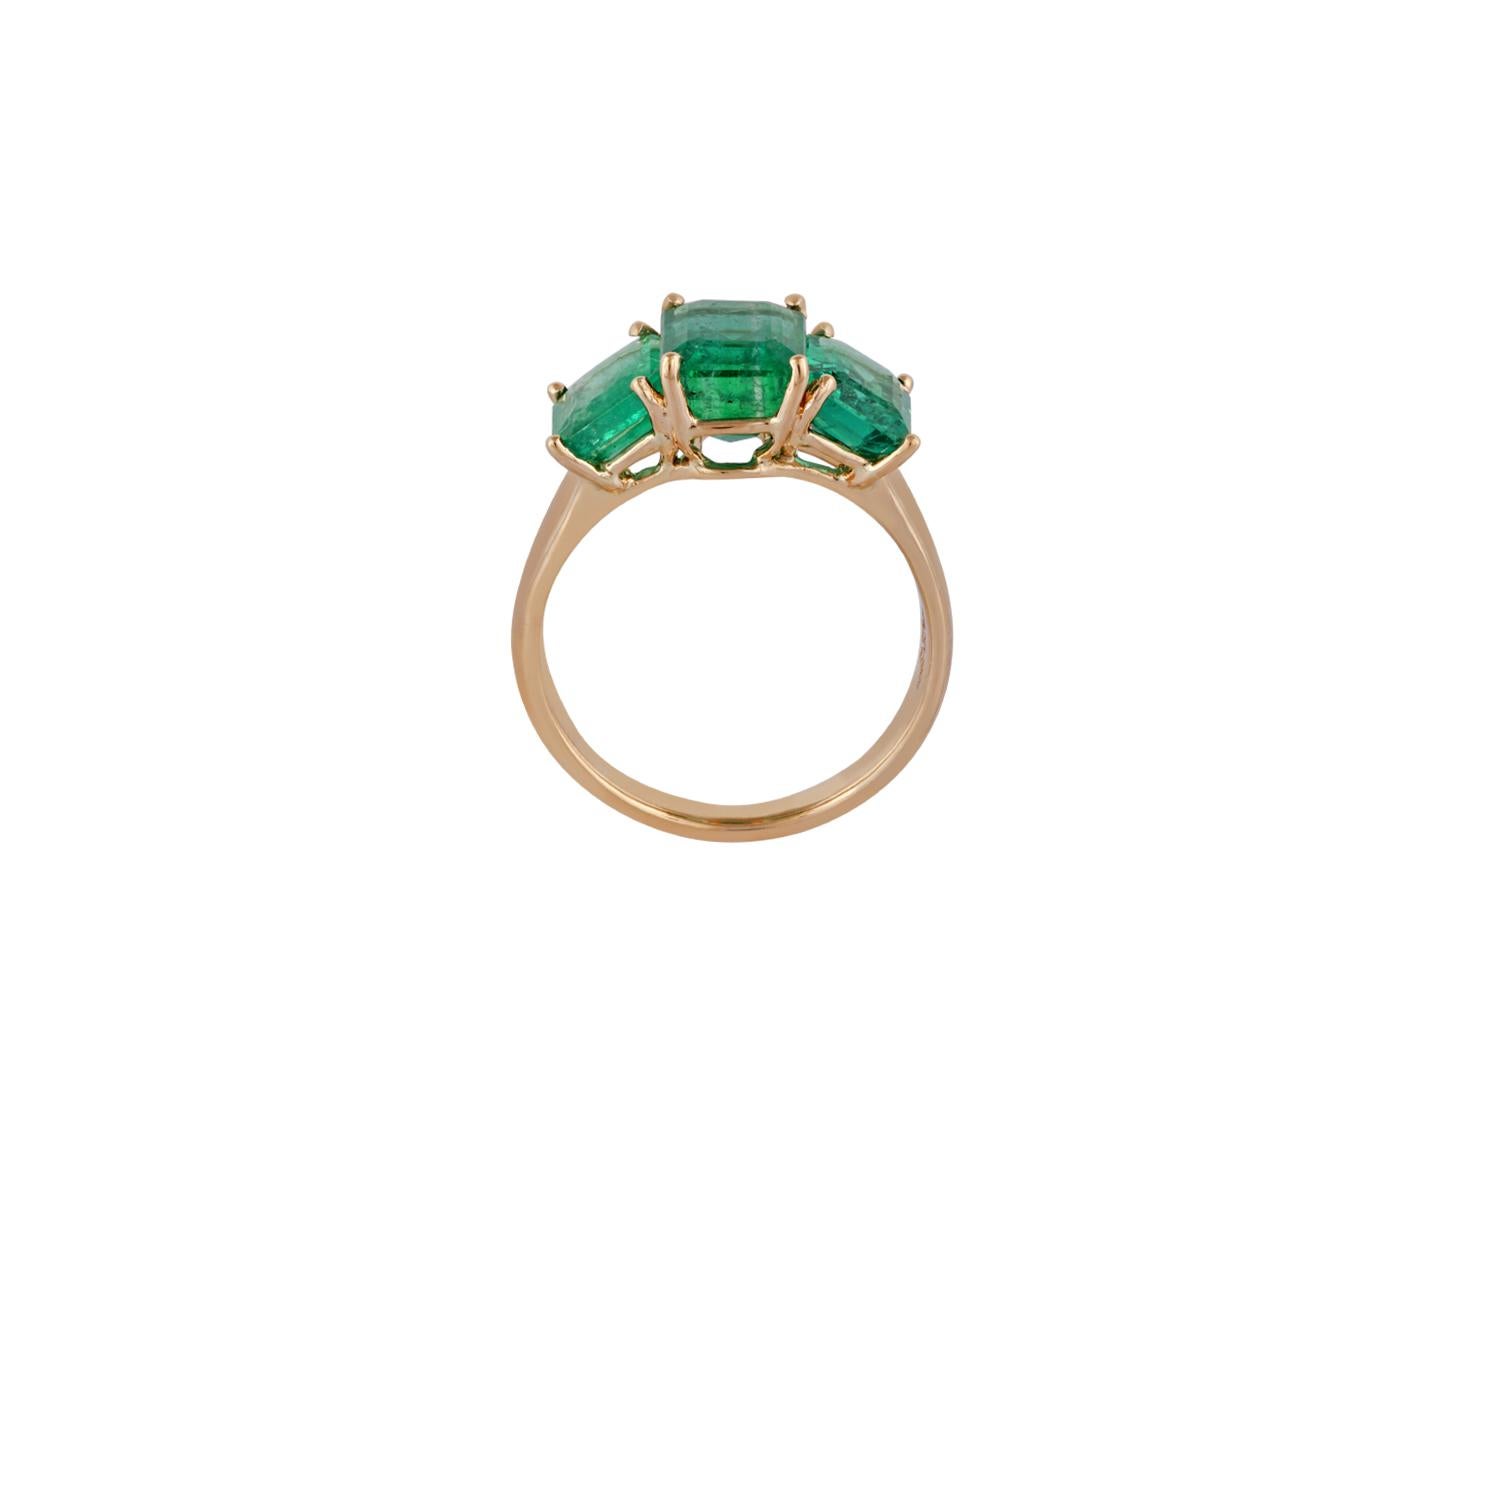 This is an elegant & classic style of emerald ring studded in 18k yellow gold, this ring contains 3 pieces of octagonal shaped emeralds weight 5.16 carats, ring contains the total gold weight is 4.42 grams, ring size can be done as per the